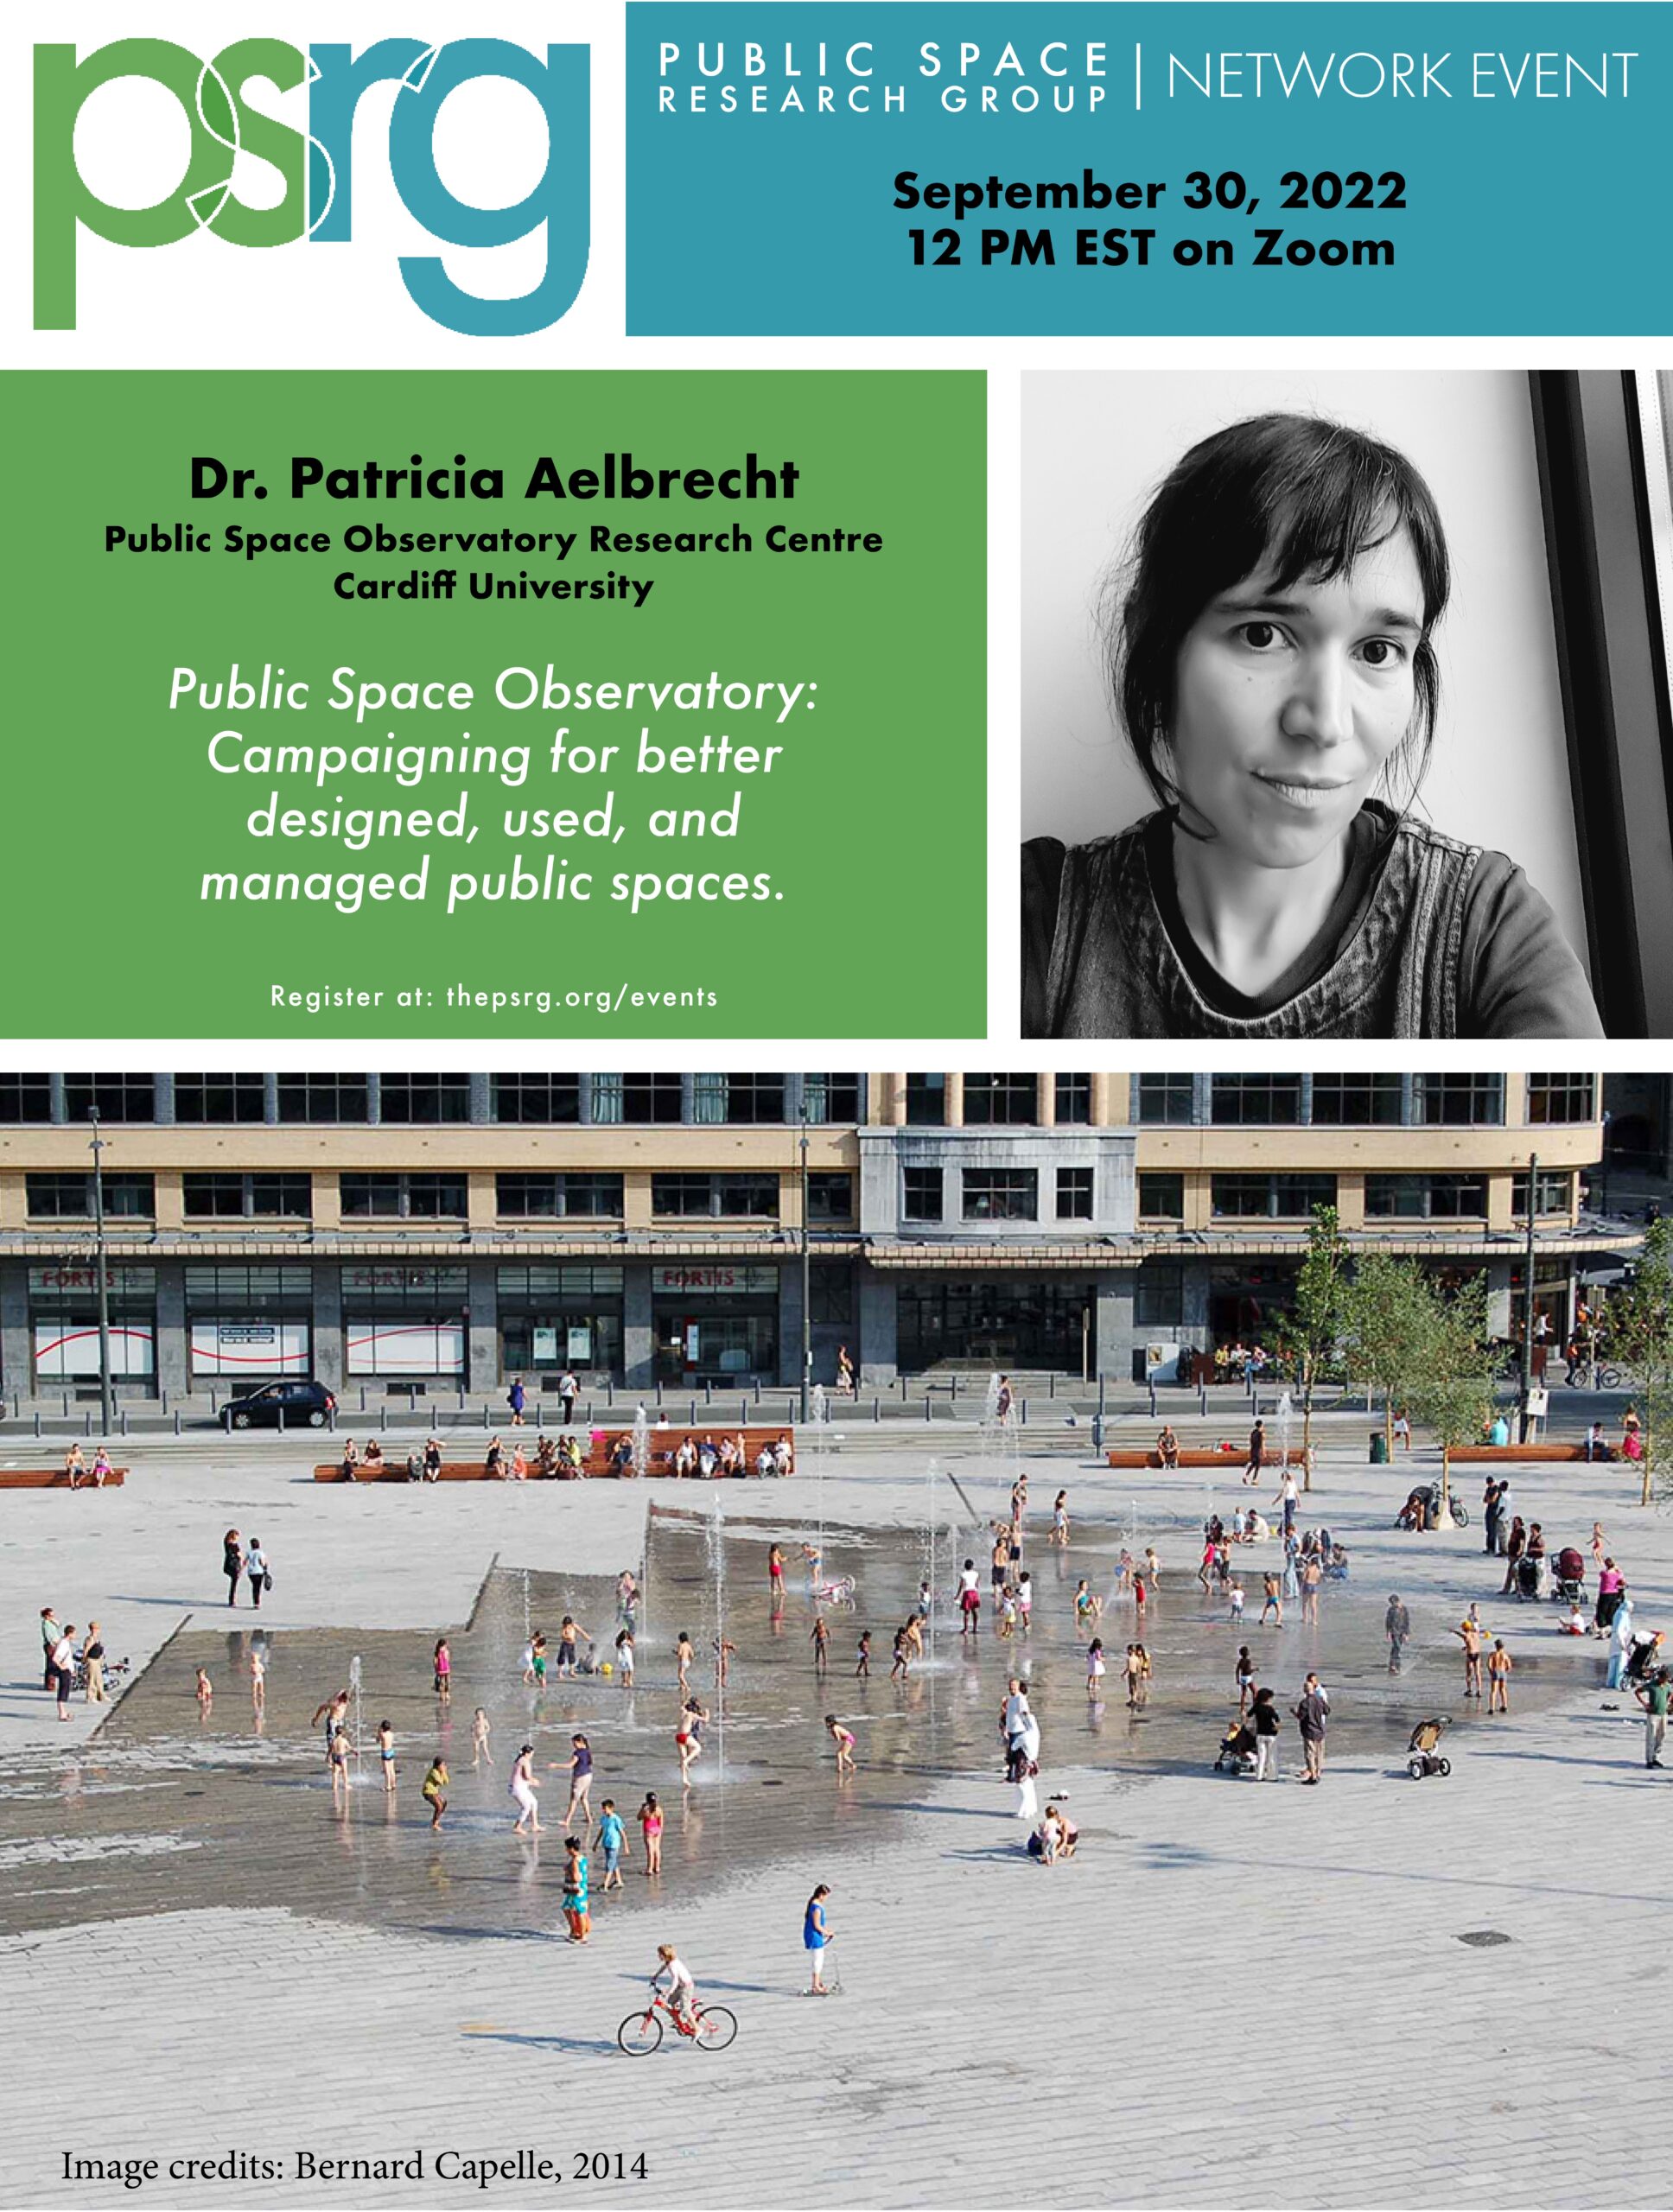 SEPTEMBER 30 @12ET:: Dr. Patricia Aelbrecht presents: Public Space Observatory: Campaigning for better designed, used, and managed public spaces